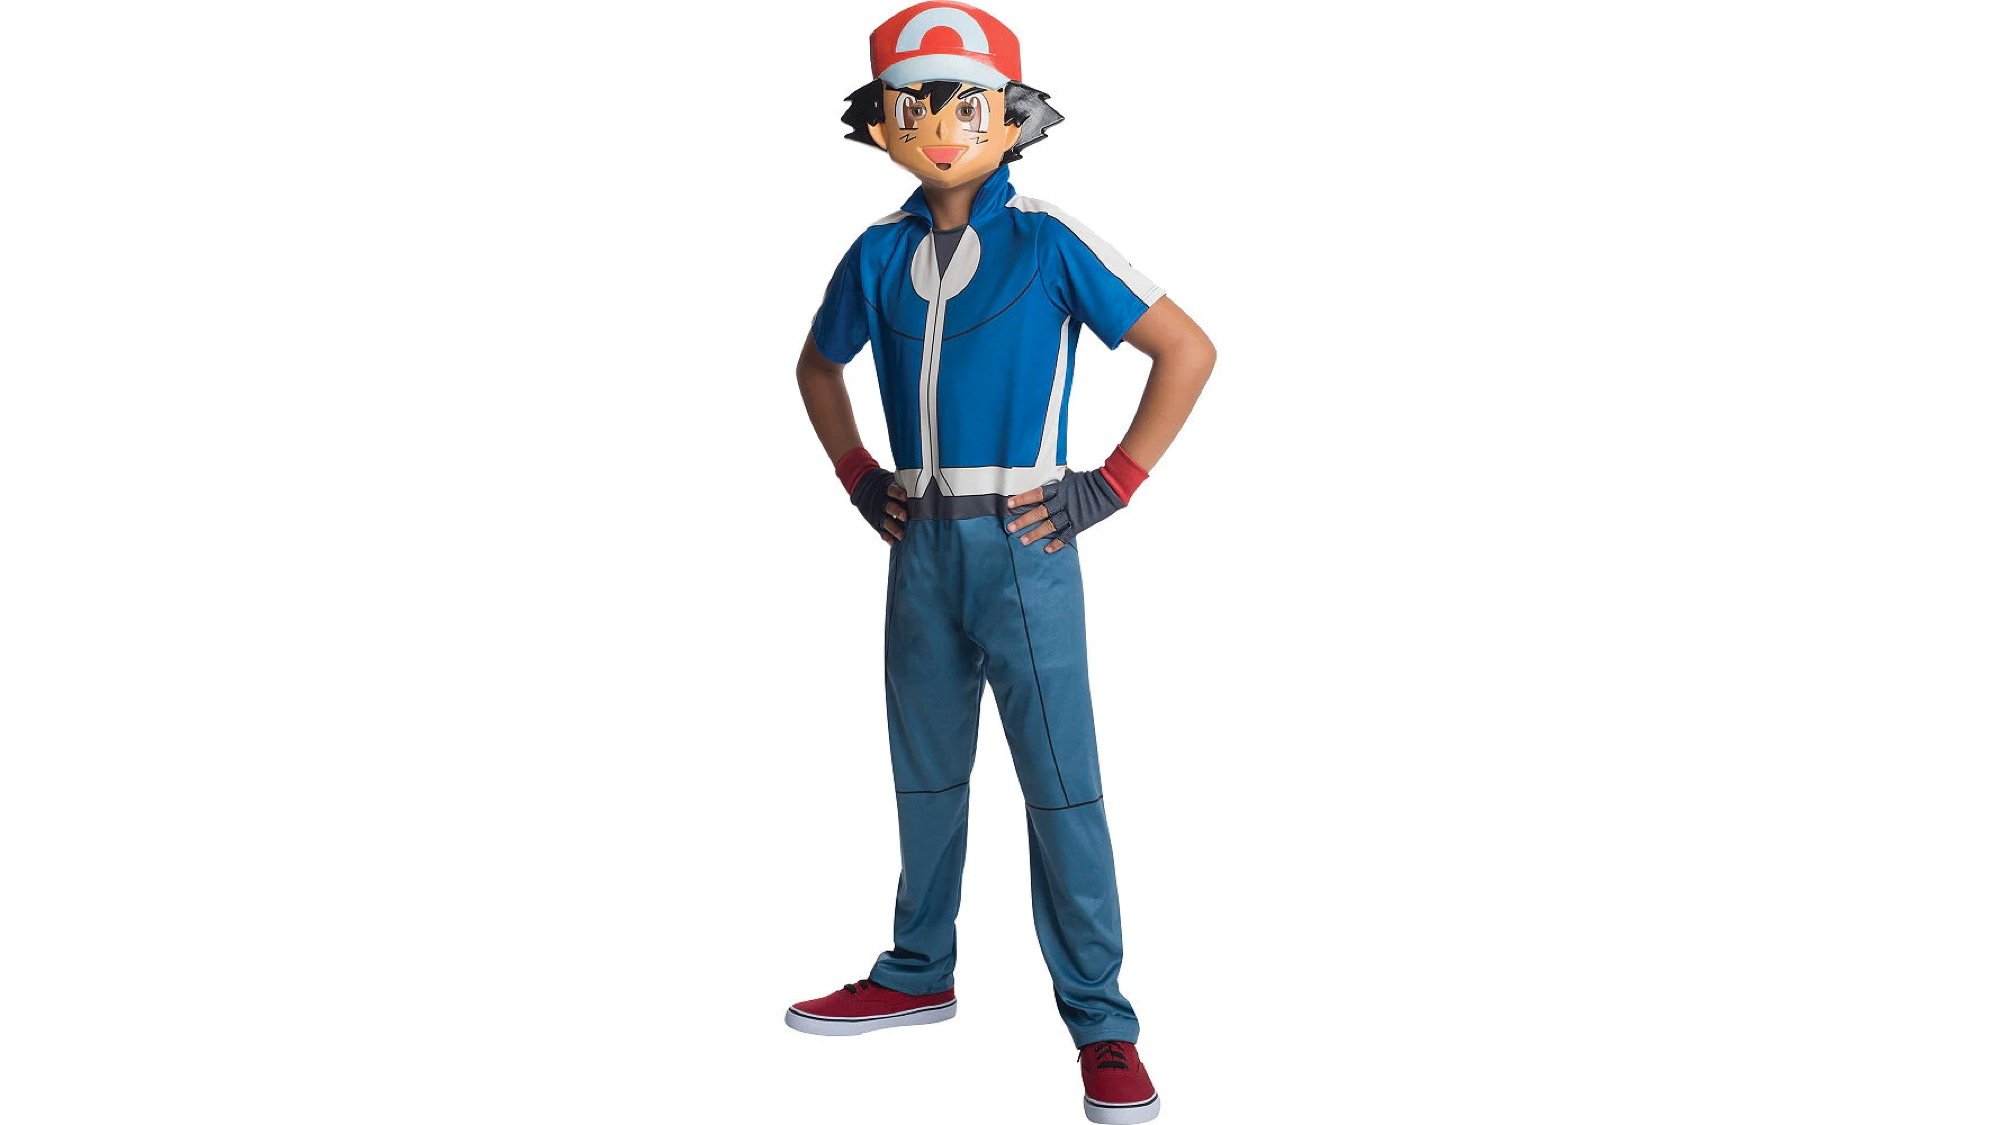 Random This Terrifying Ash Ketchum Costume Is Perfect For Halloween 